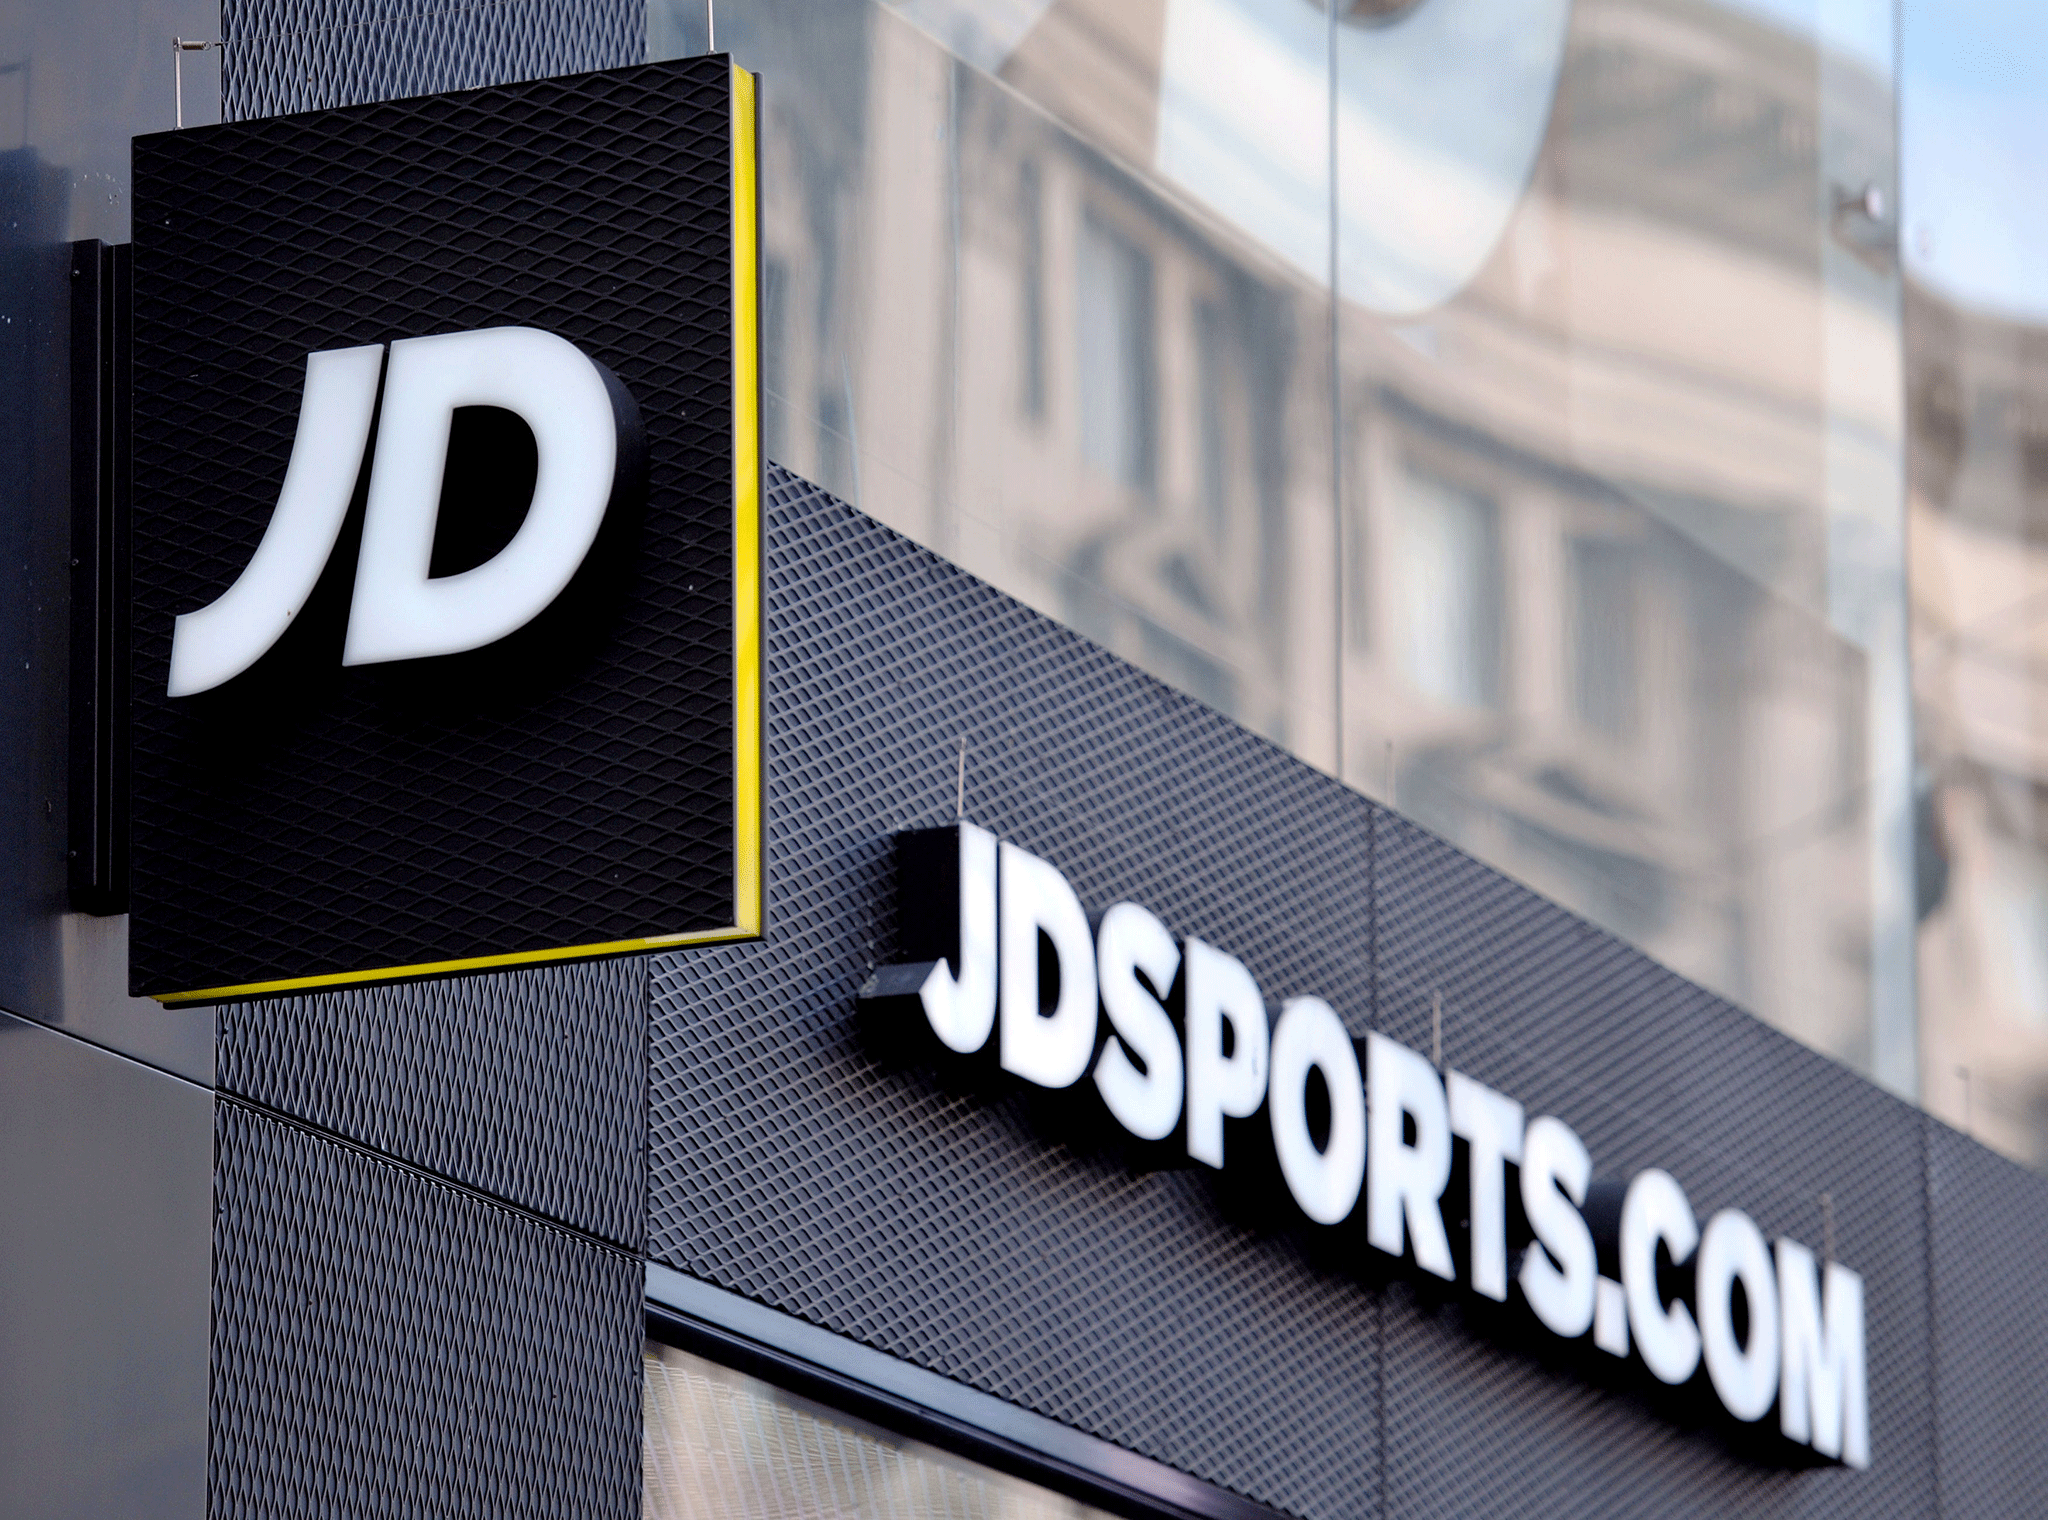 JD Sports now has over 1,200 stores